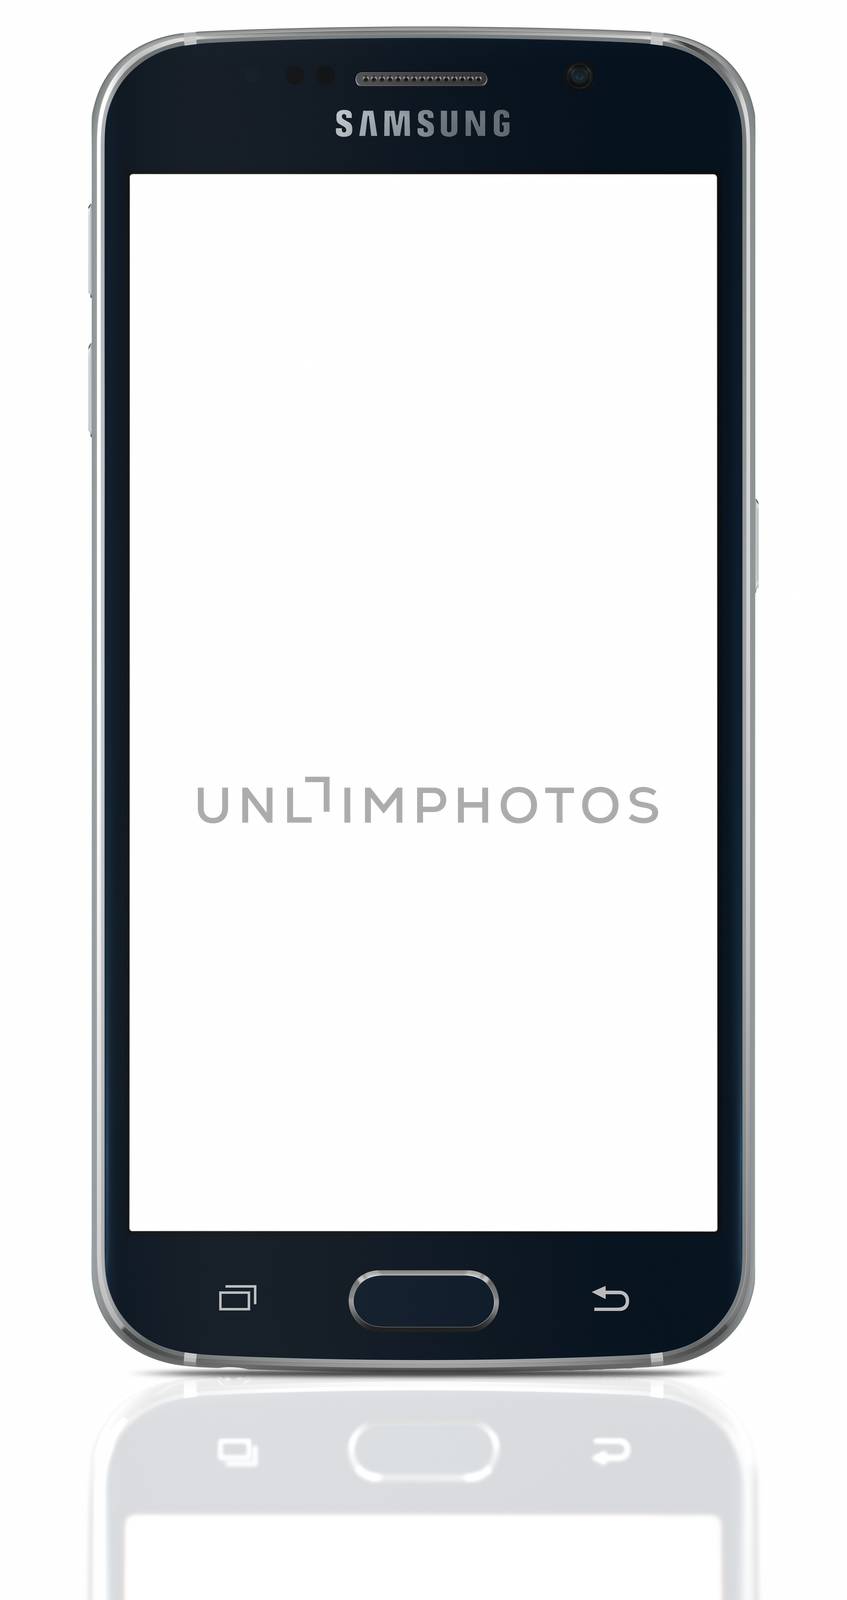 Galati, Romania - April 28, 2015: Black Sapphire Samsung Galaxy S6 with blank screen on white background. The telephone is supported with 5.1" touch screen display and 1440 x 2560 pixels resolution.  The Samsung Galaxy S6 was launched at a press event in Barcelona on March 1 2015.